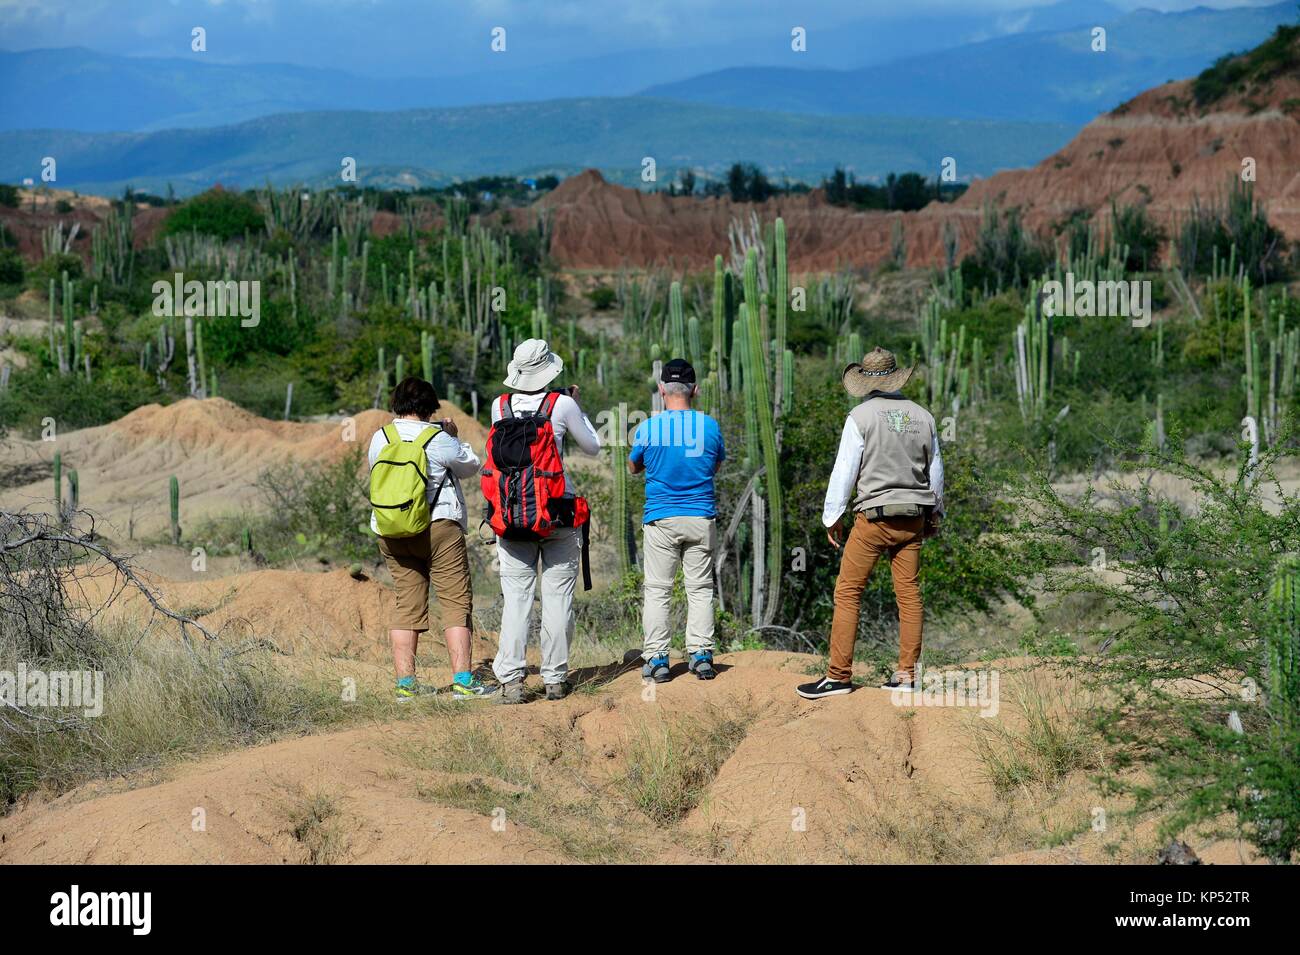 People trekking in Red hills of Tatacoa Desert in Huila, Colombia, South America. Stock Photo